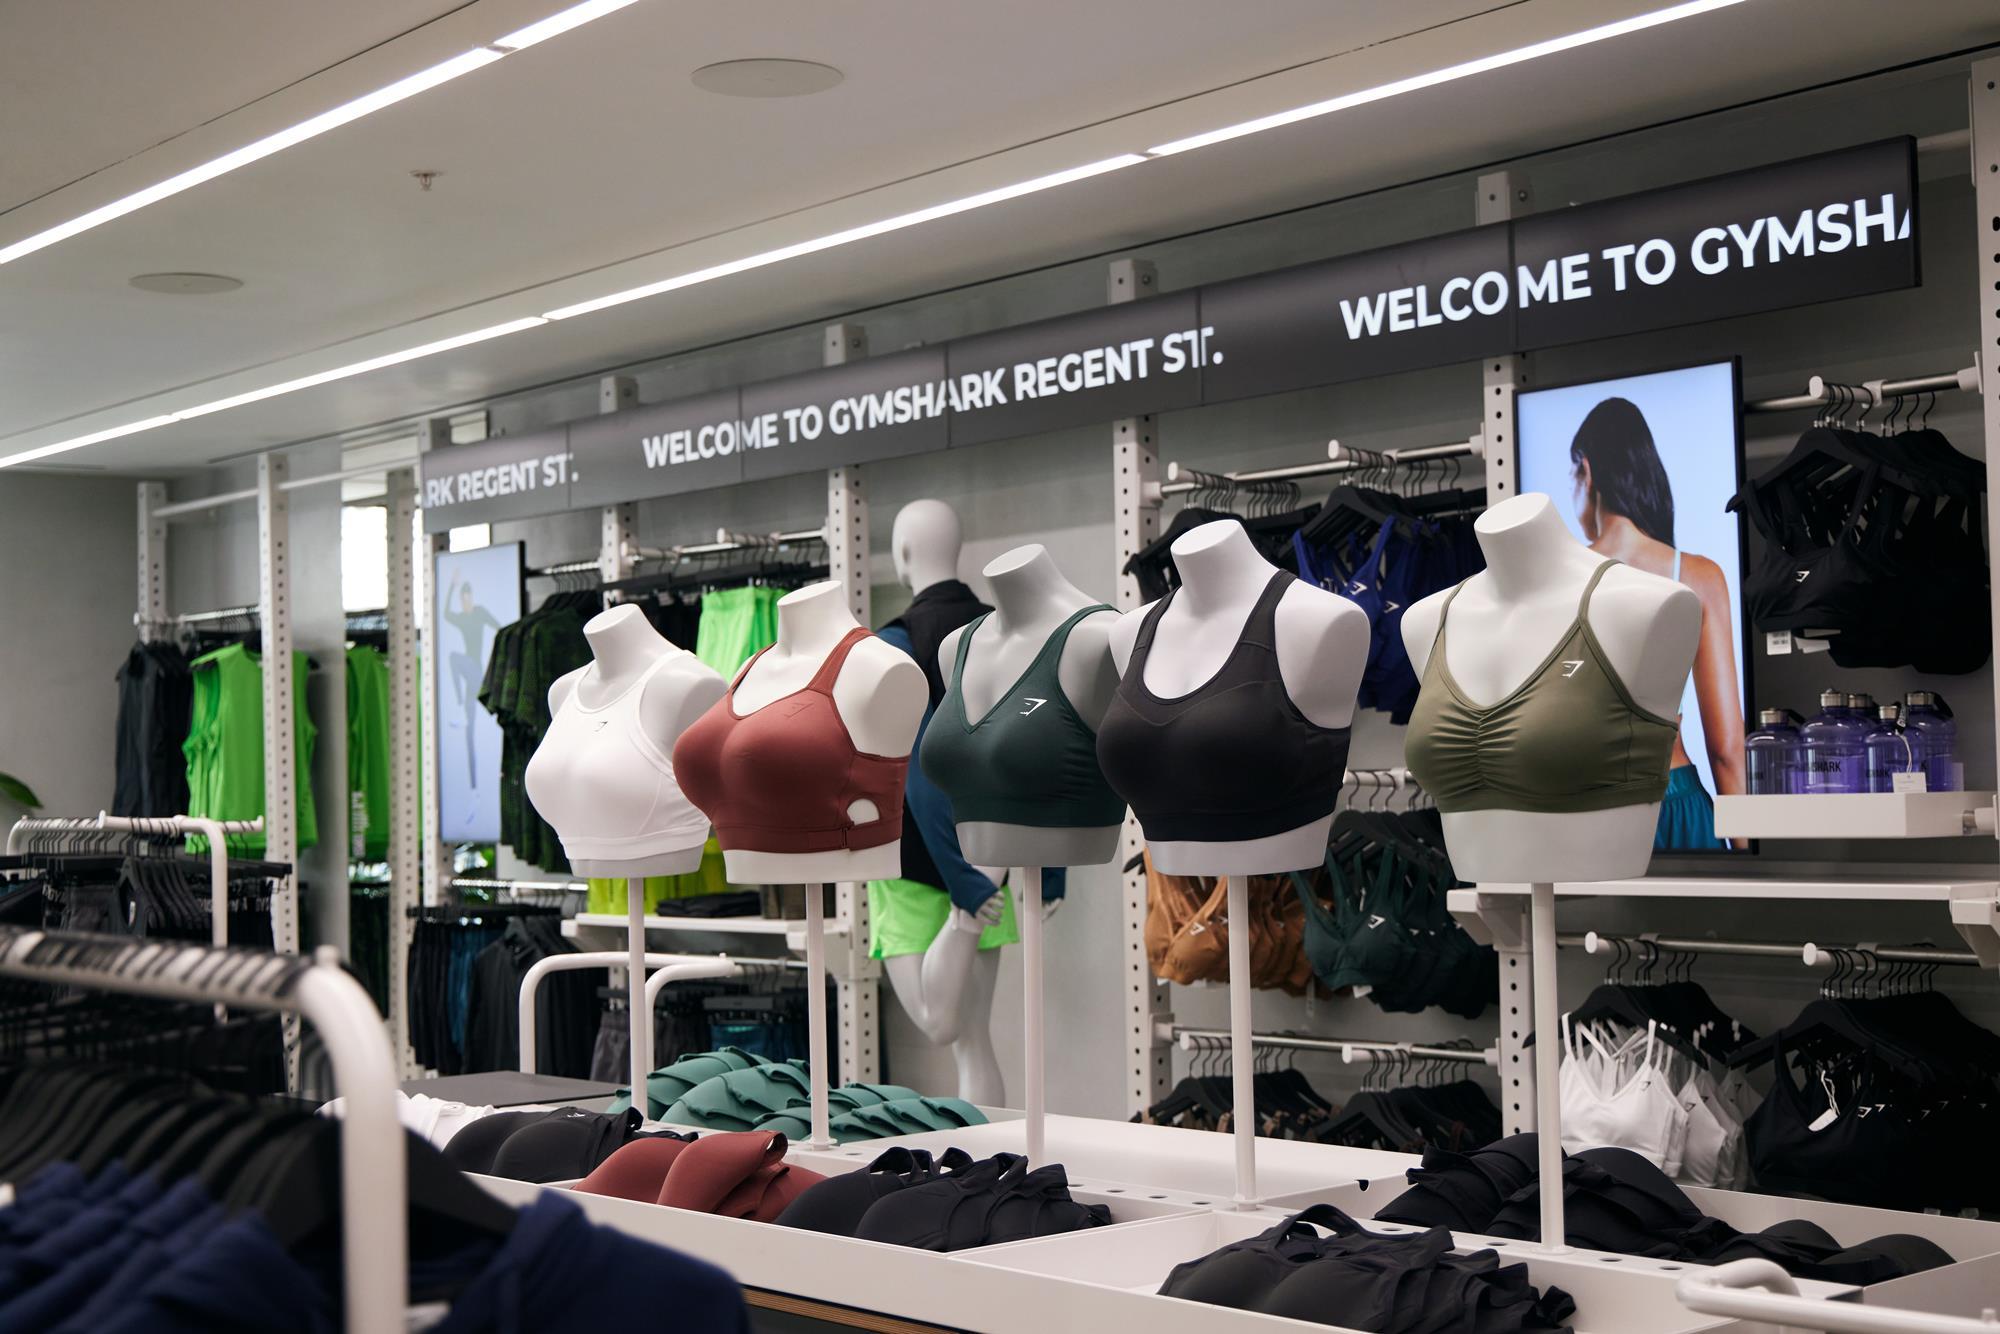 We're bigger than clothes': Why Gymshark is opening its first flagship store